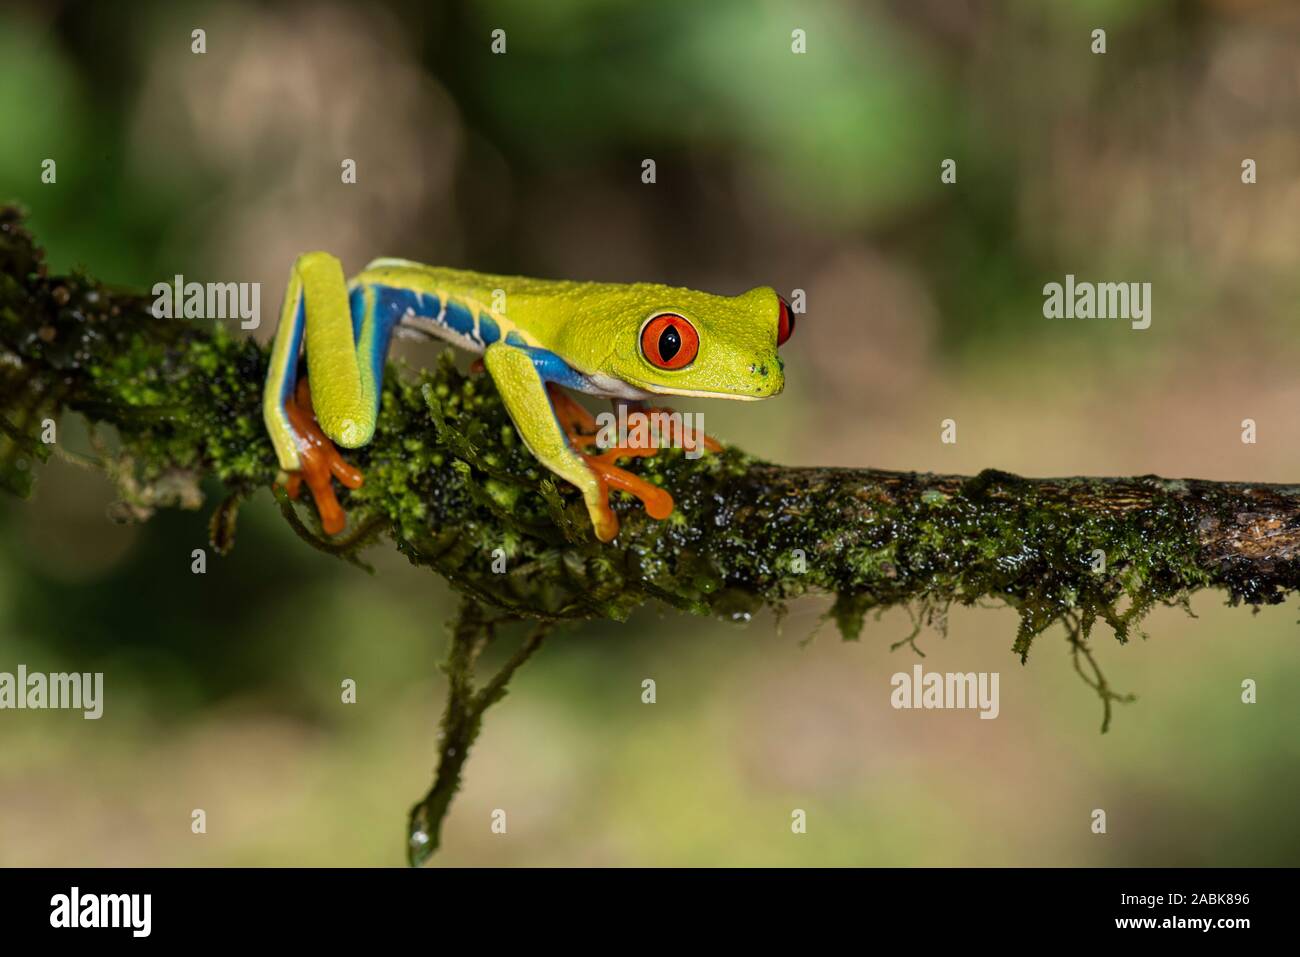 Red-Eyed Tree Frog : Agalychnis. cllidryas Costa Rica. Banque D'Images